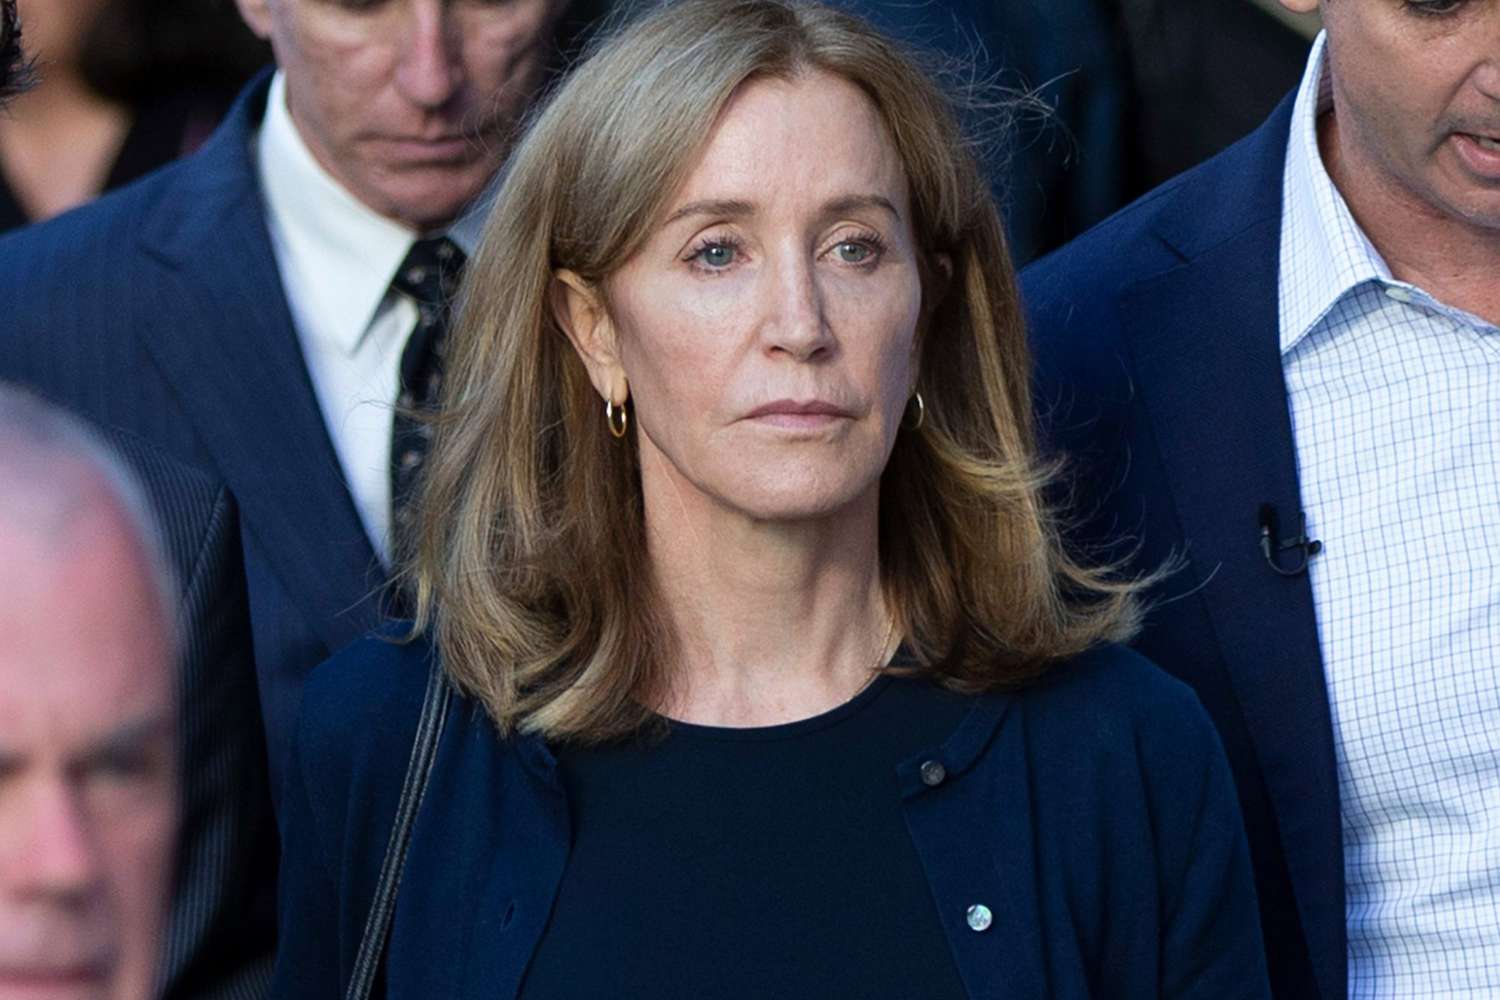 Felicity Huffman has completed her full sentence for college admissions scandal - EW.com